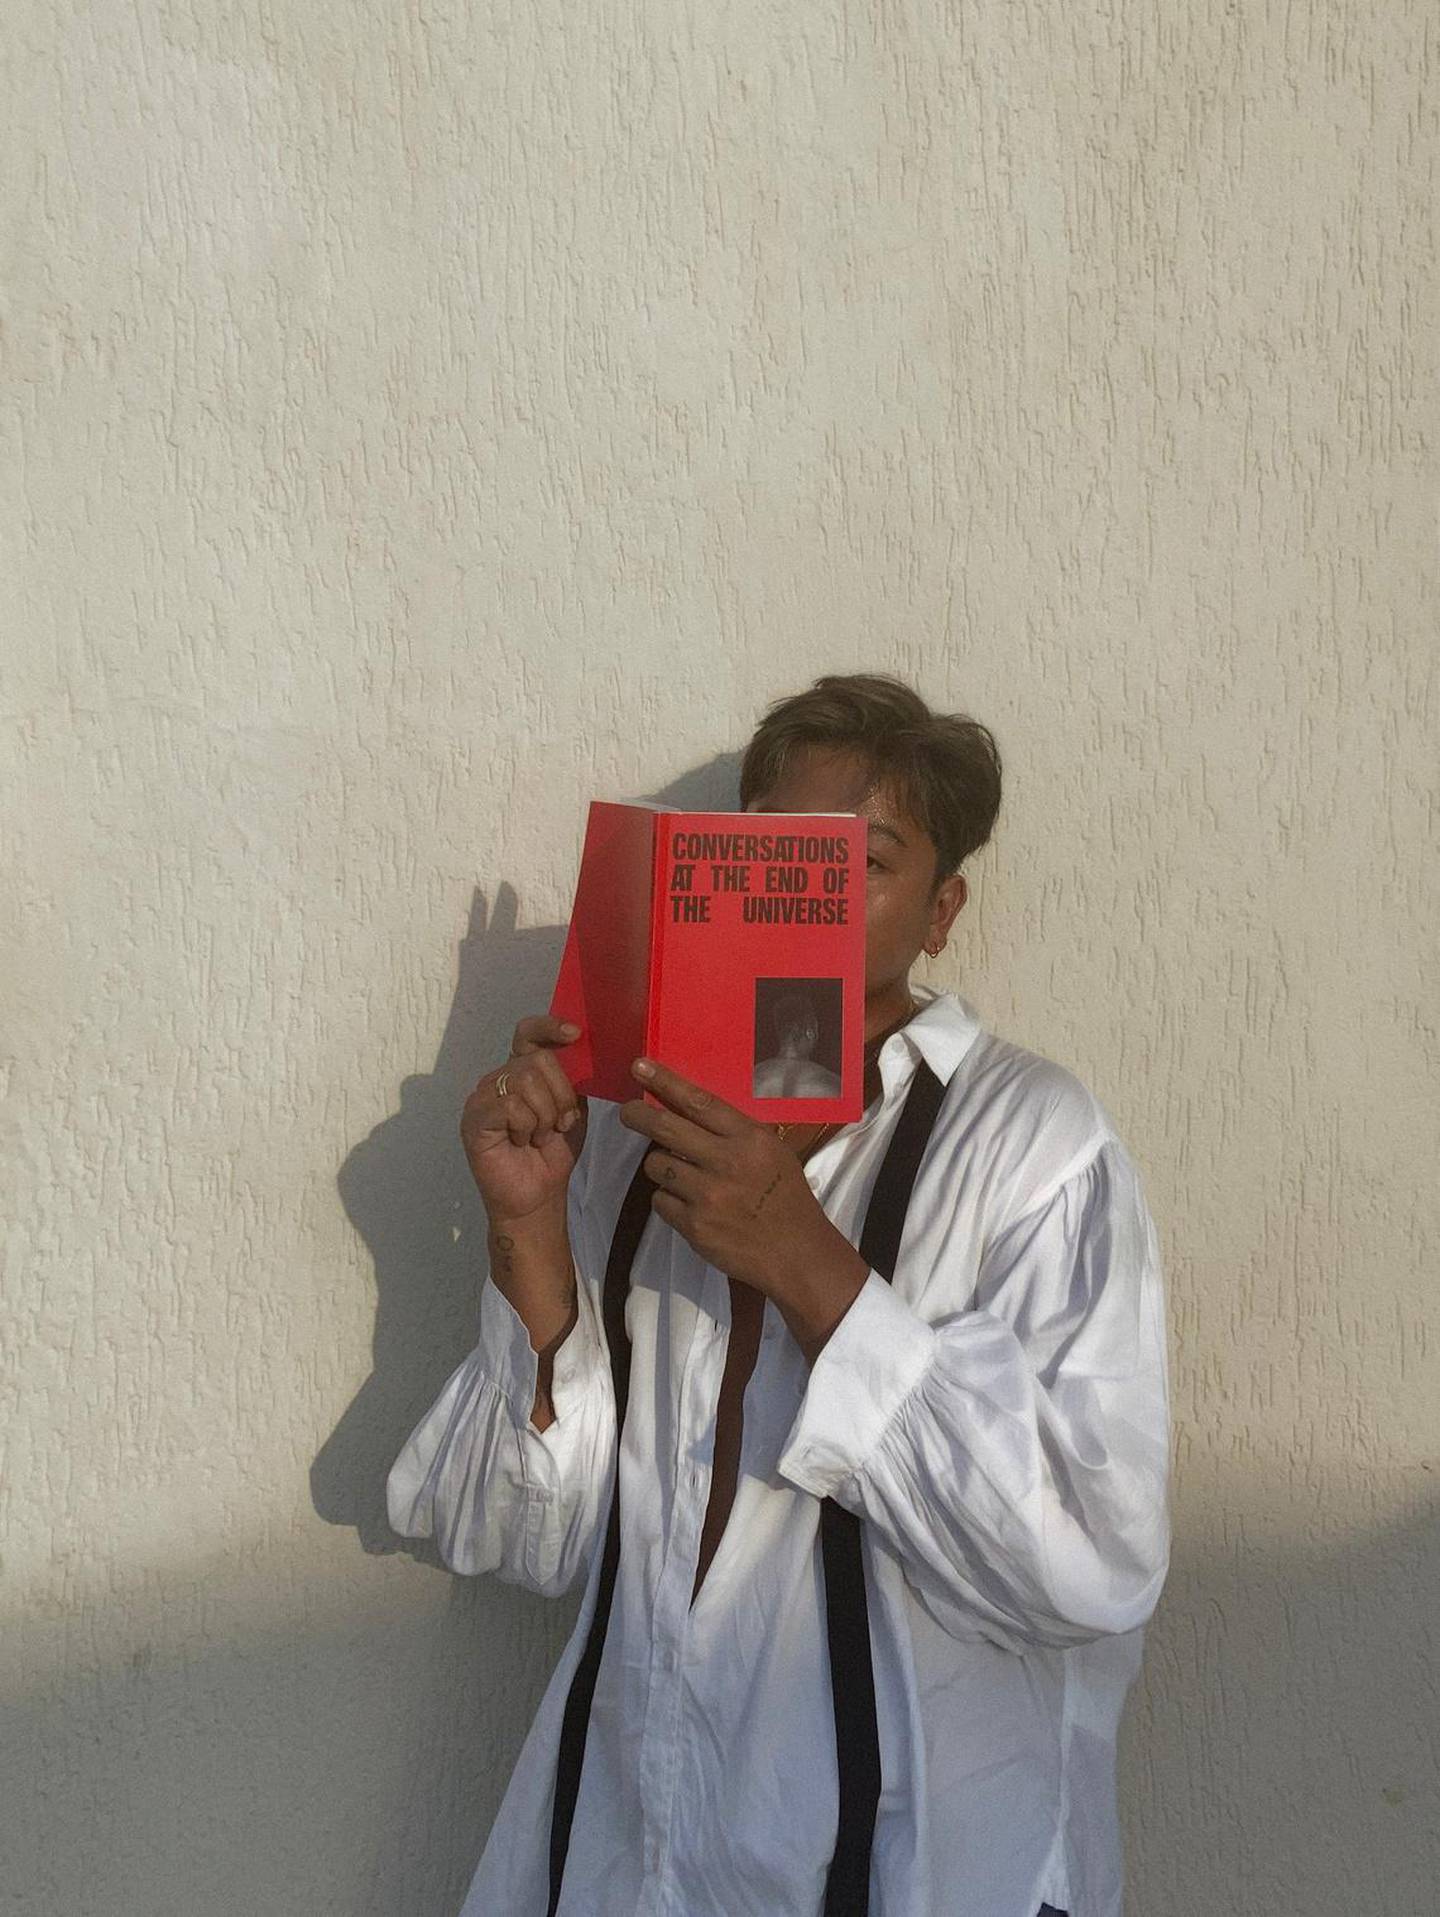 Dubai-born photographer Augustine Paredes hides behind his book 'Conversations at the End of the Universe'. Courtesy of the artist